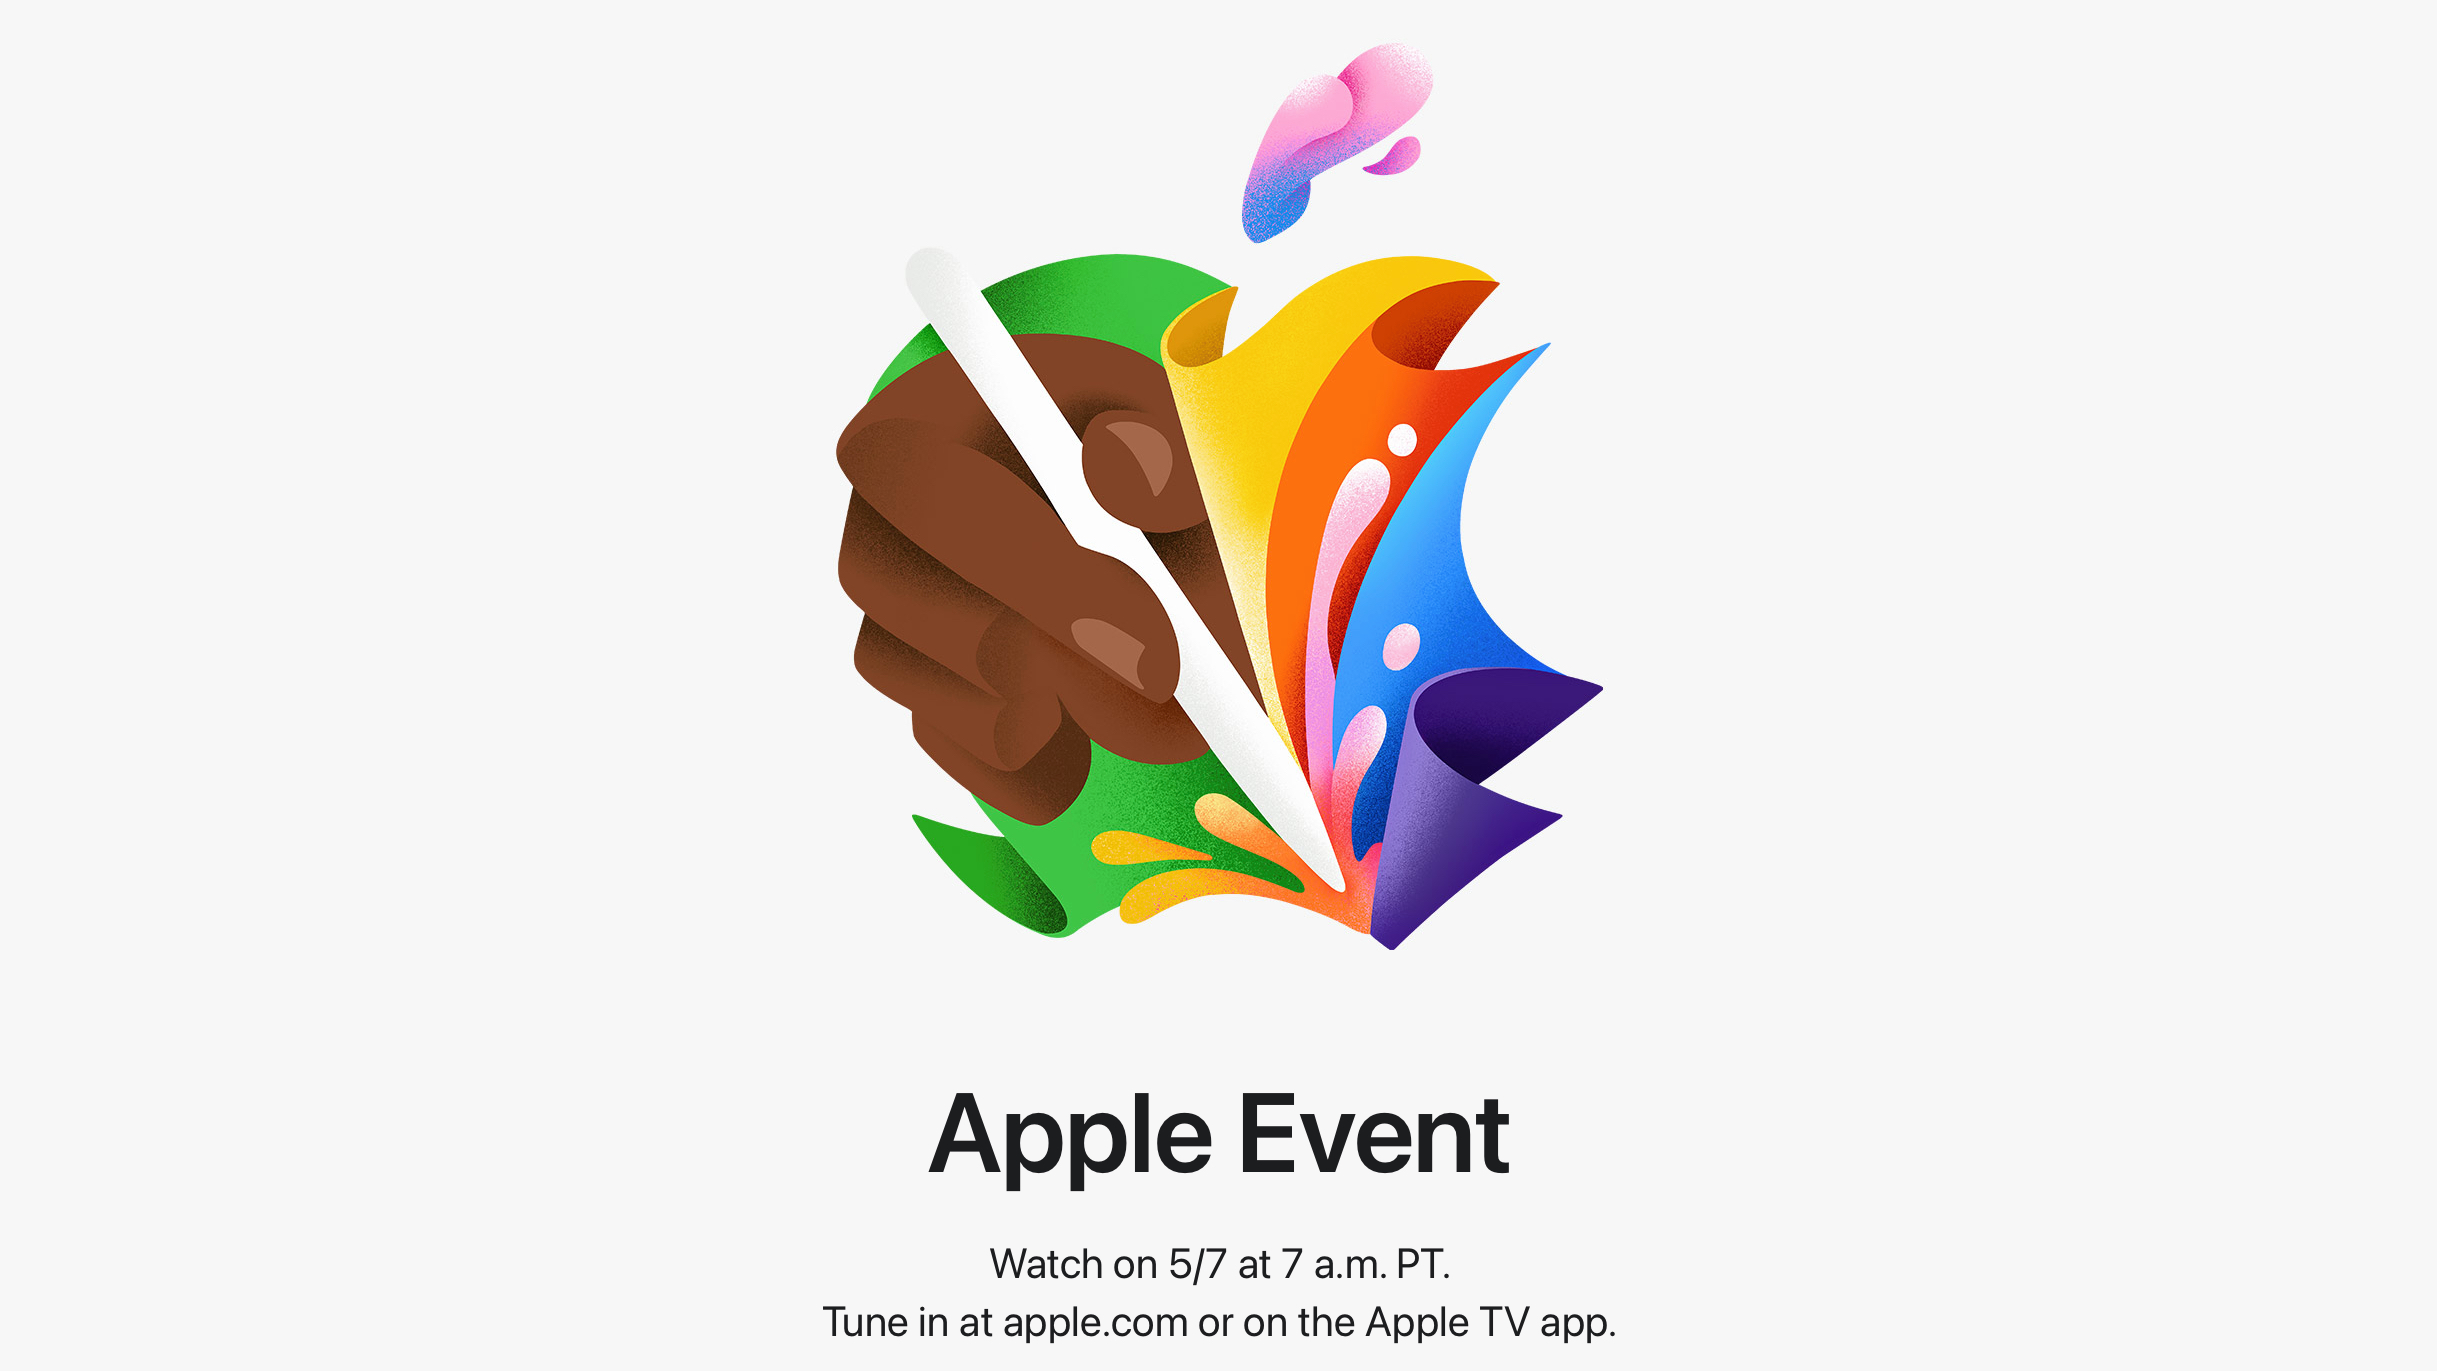 Take note: Apple’s iPad event is slated for May 7